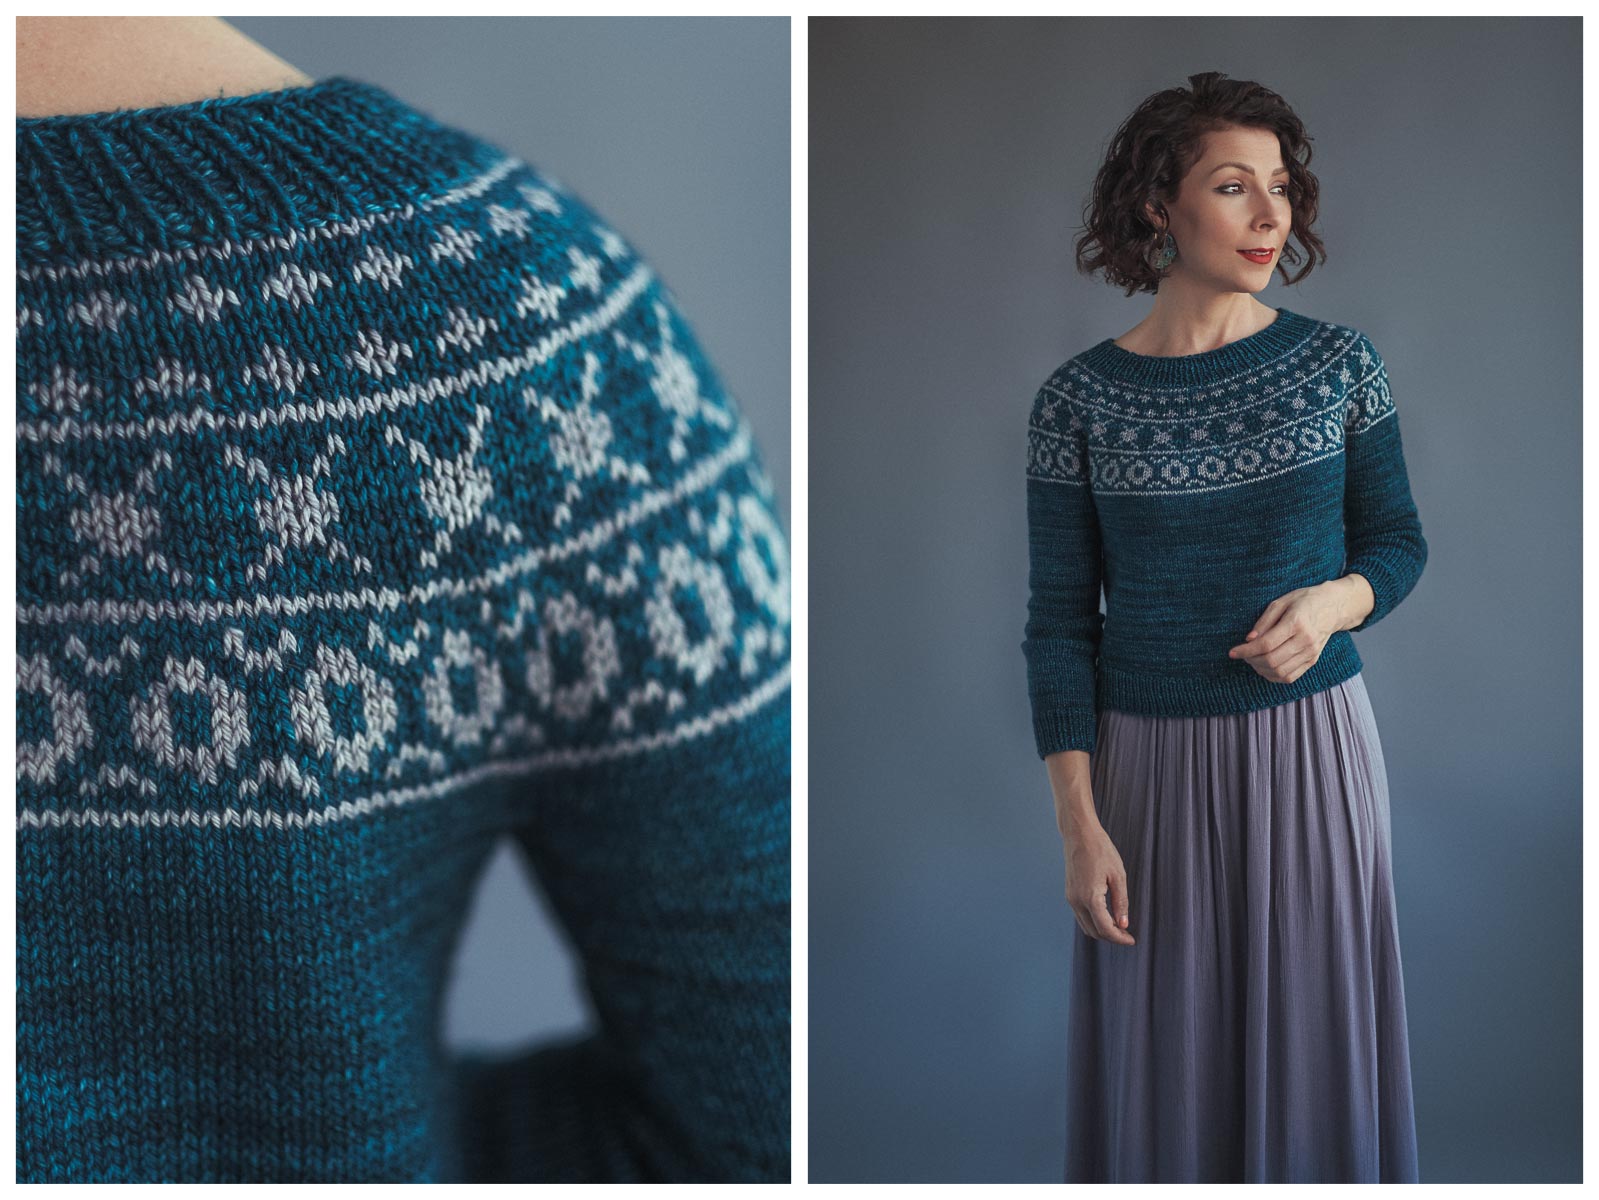 how to knit a fairisle sweater for beginners